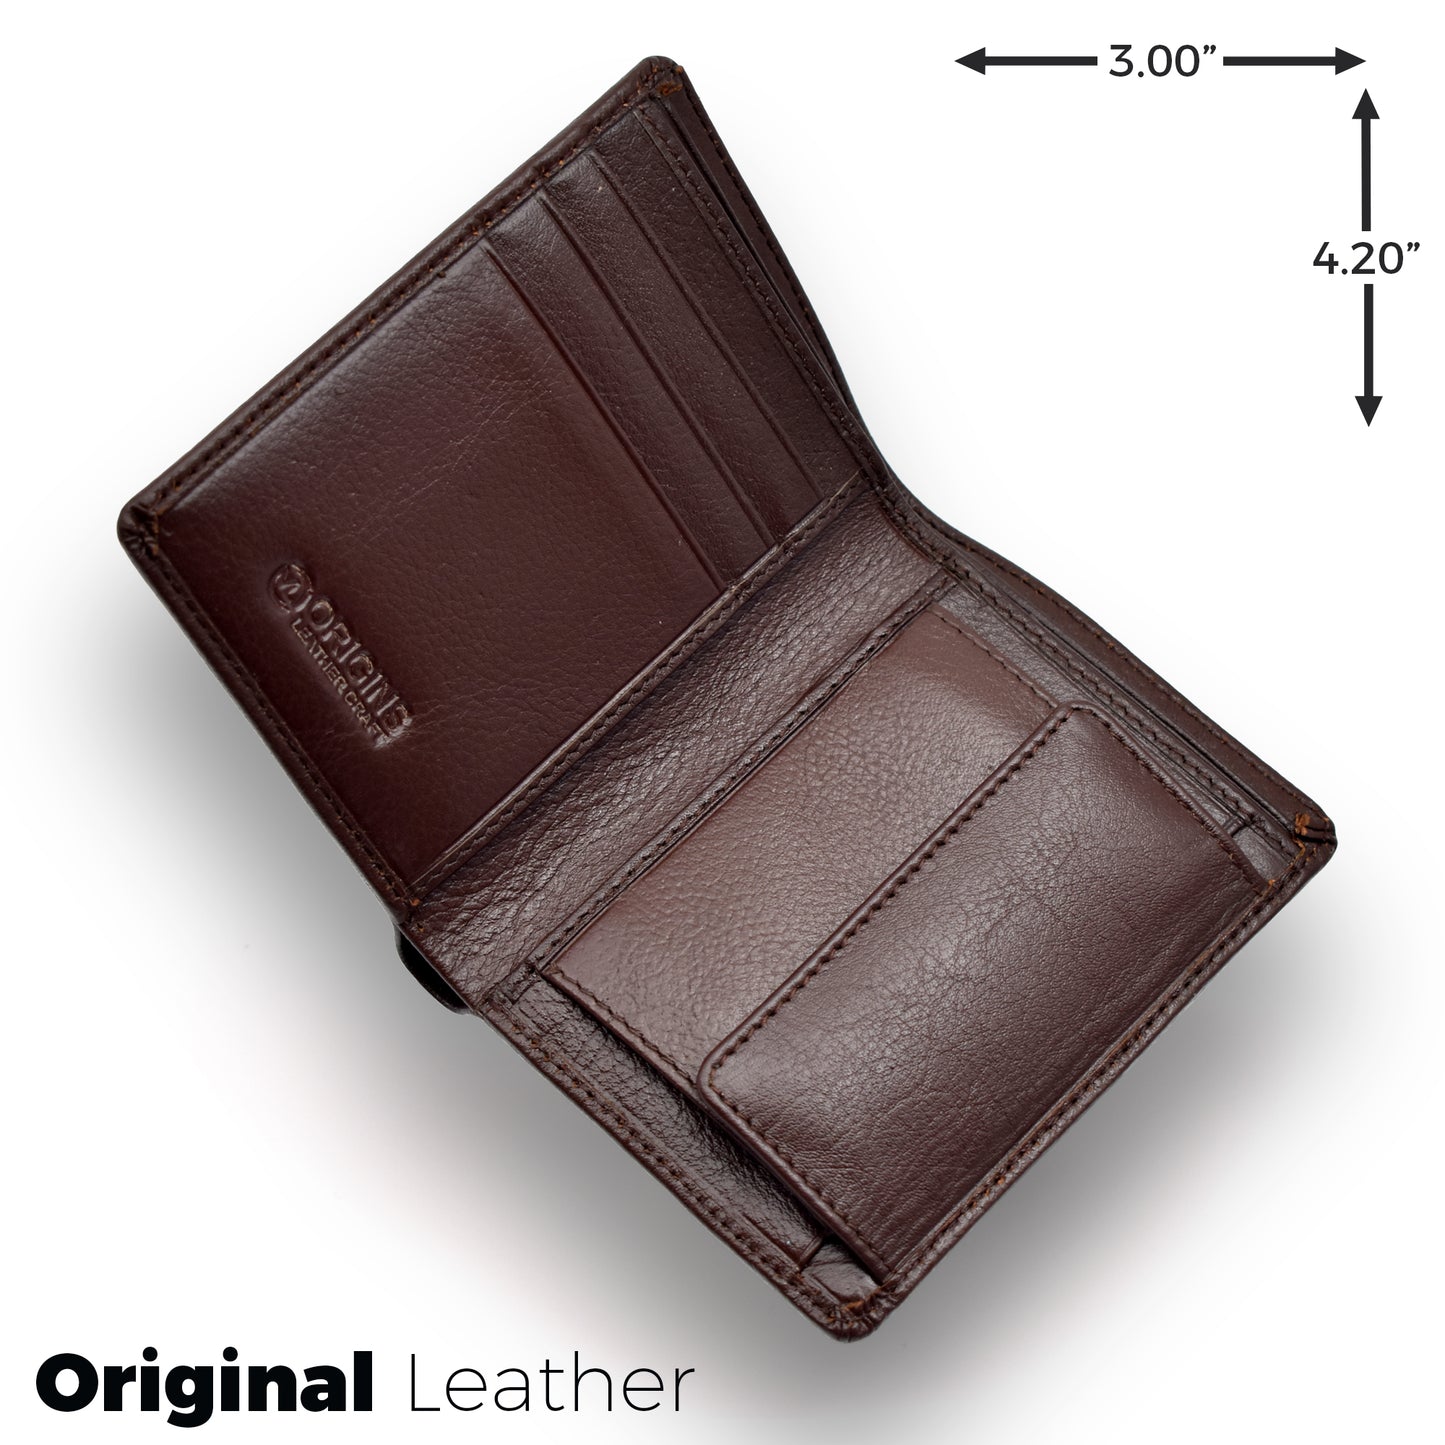 Small Size Premium Quality Leather Wallet | ORGN Wallet 16